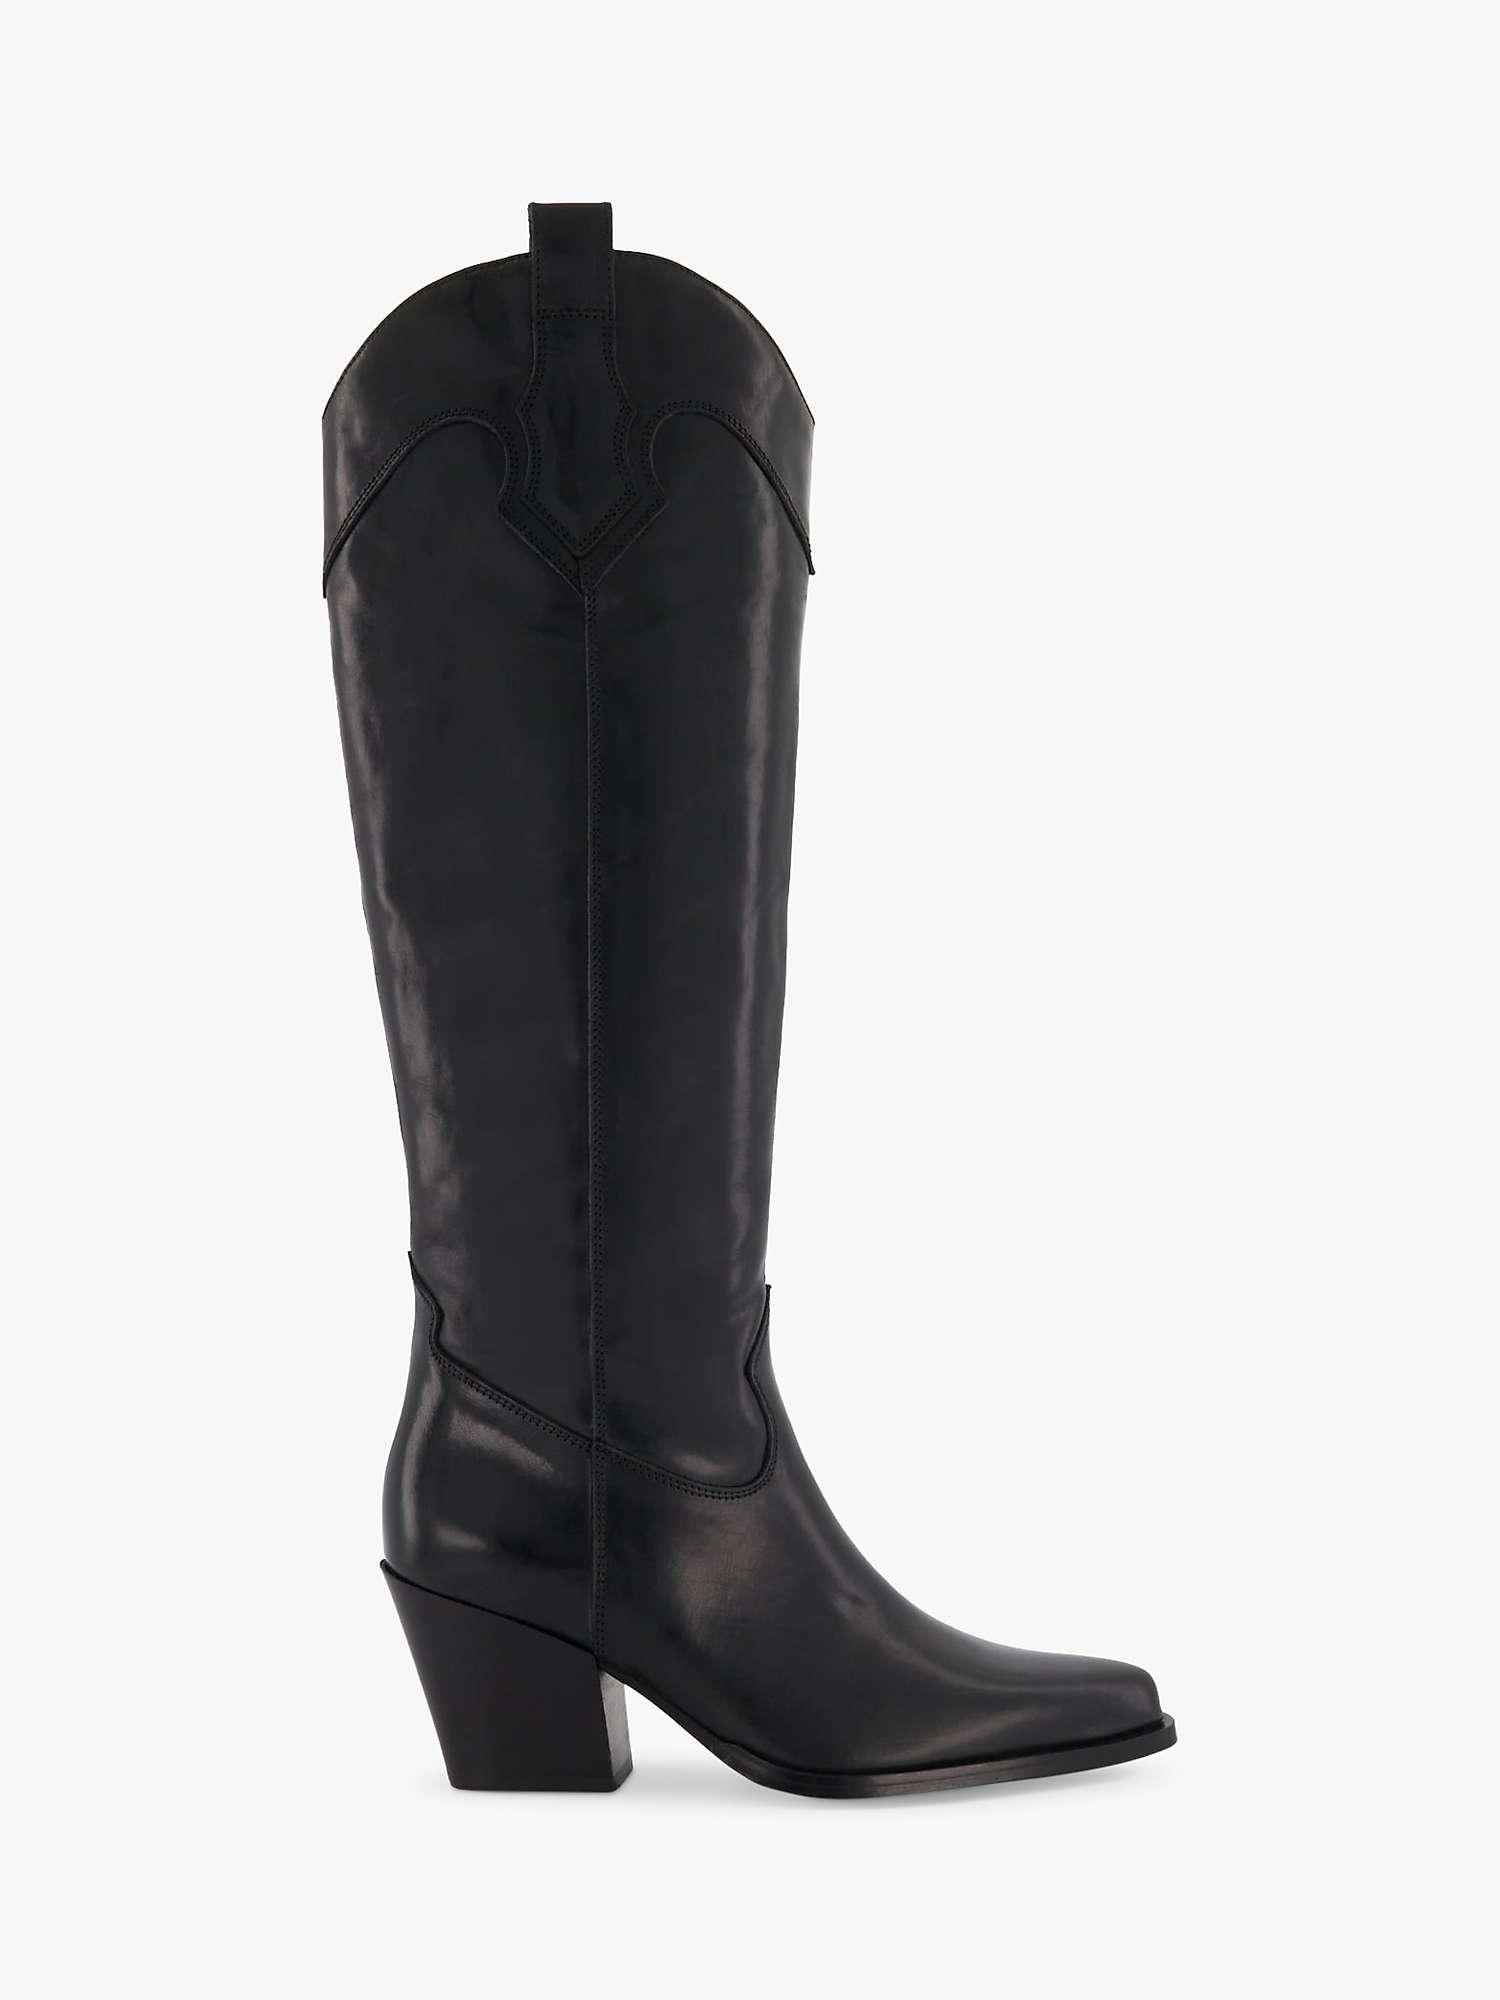 Buy Dune Tennessee Leather Cowboy Boots, Black Online at johnlewis.com